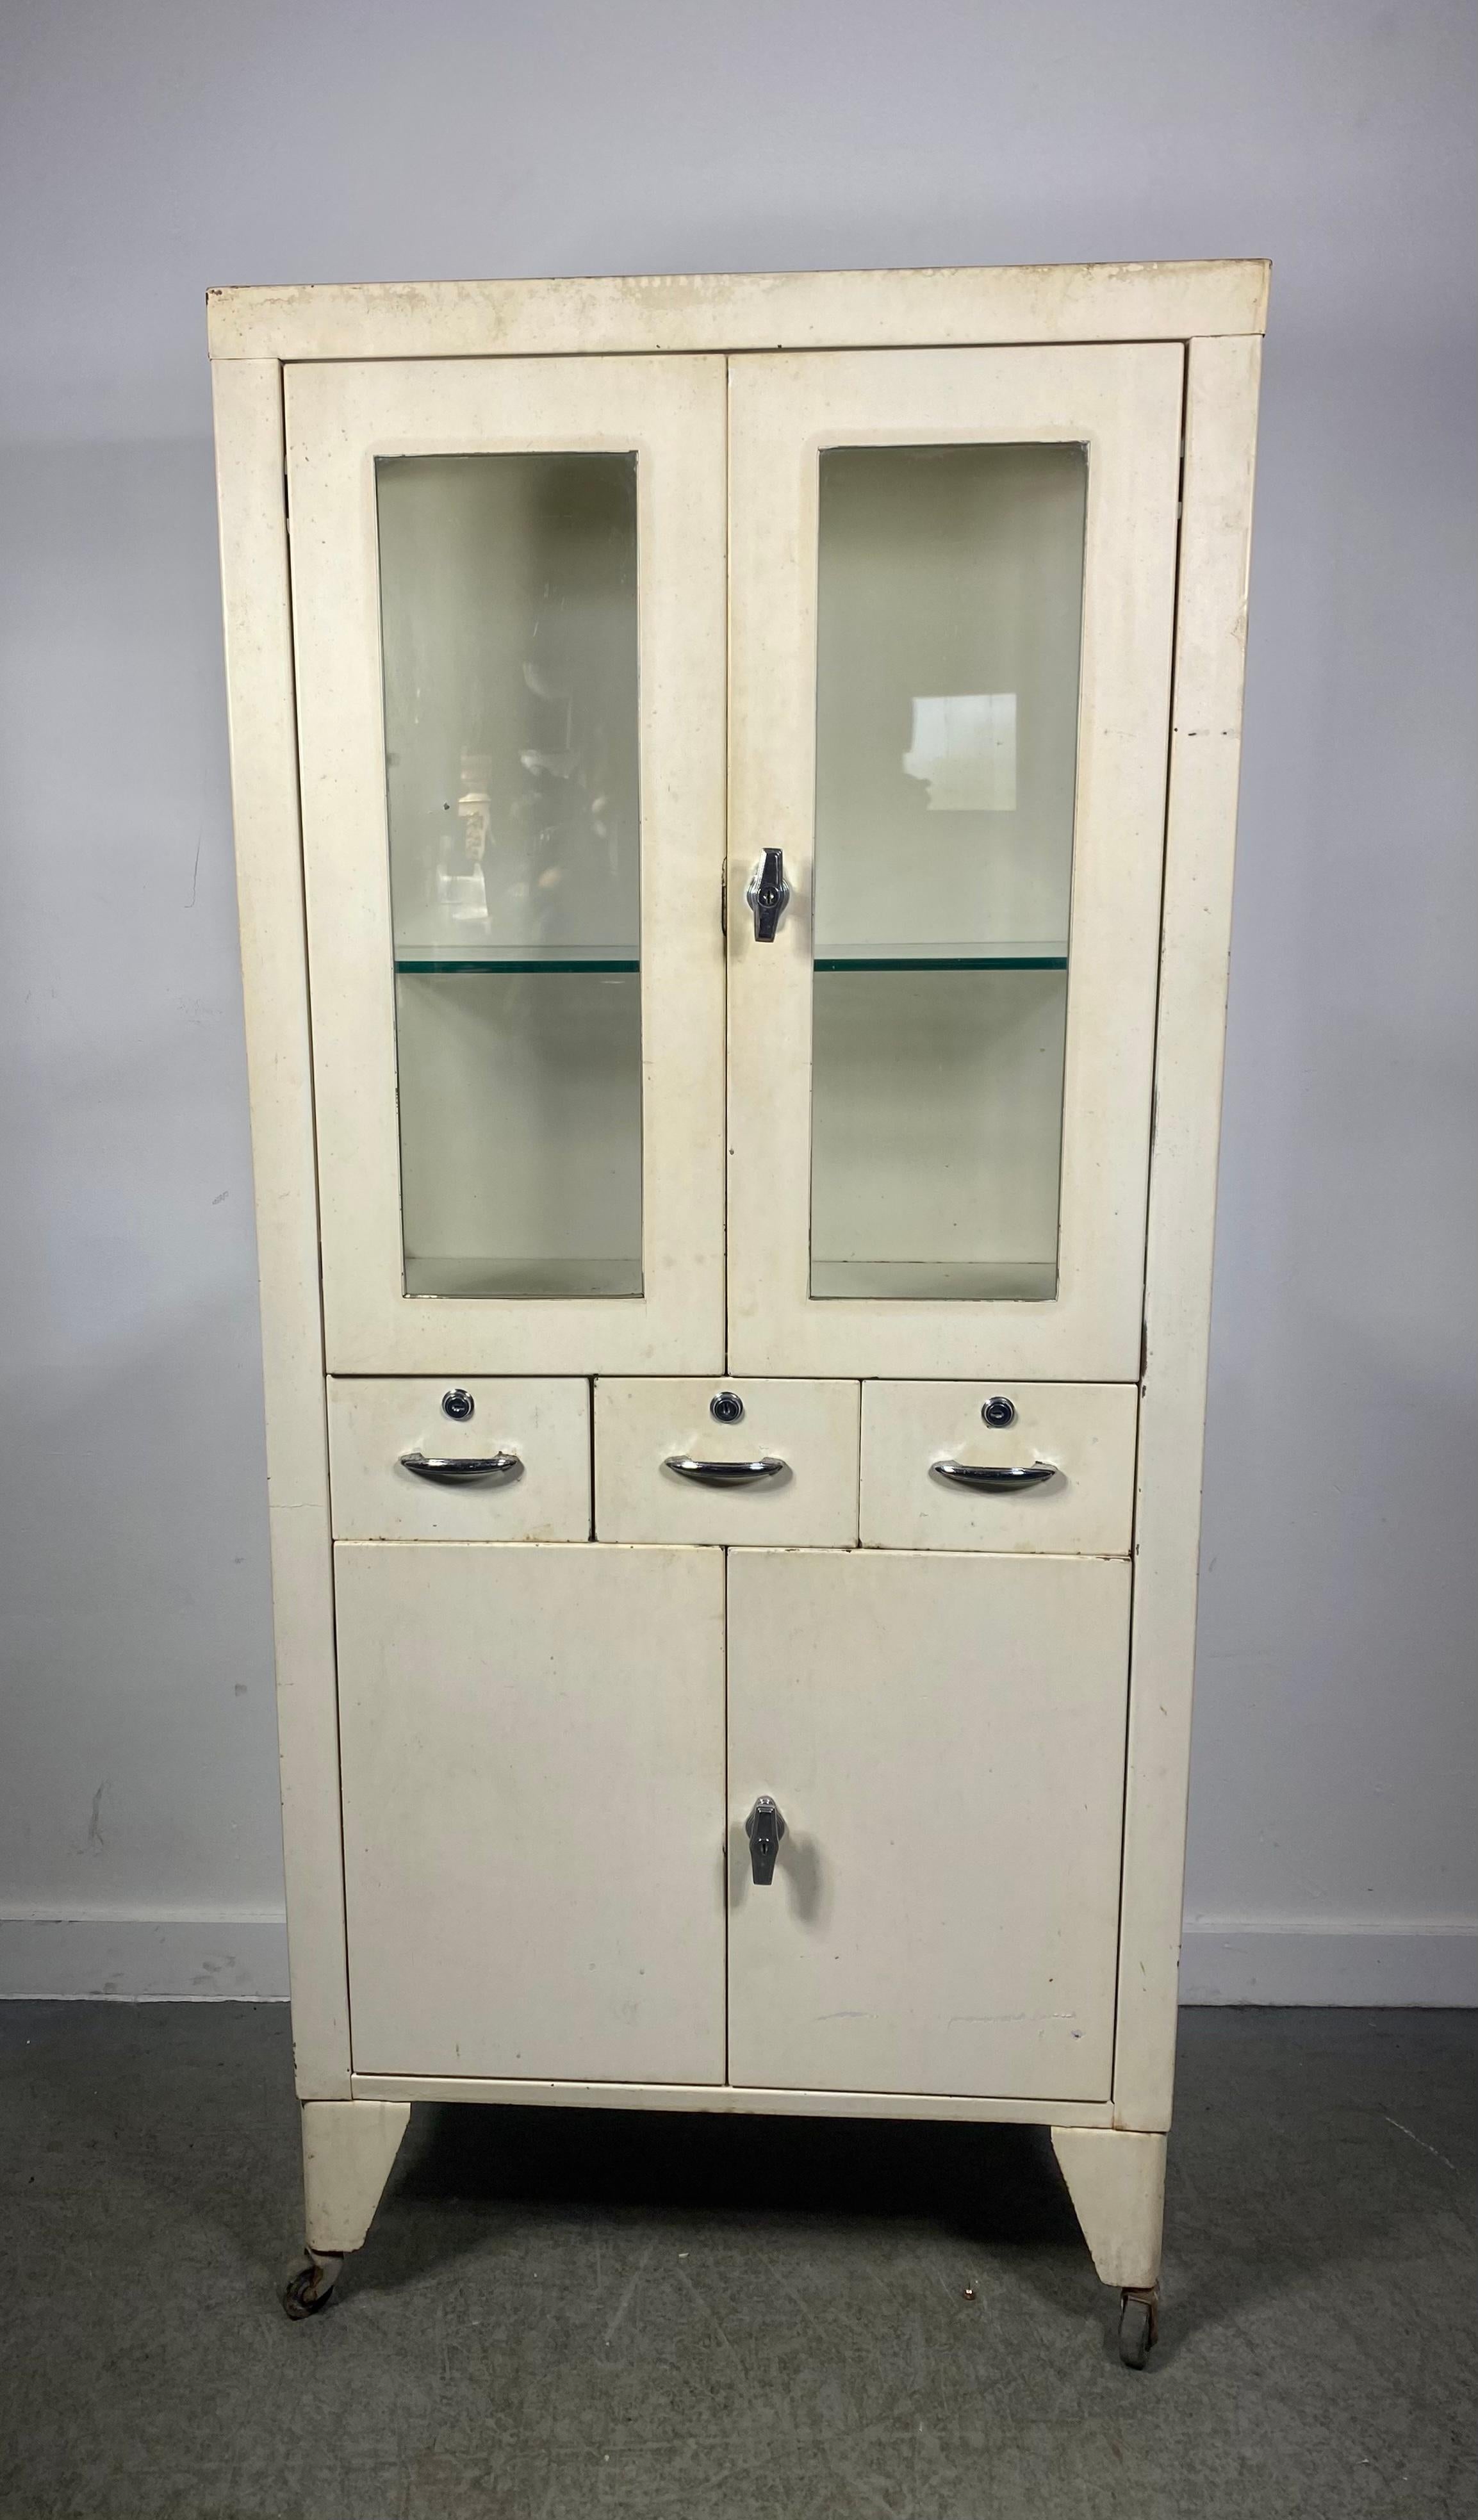 Handsome Painted Industrial Metal & glass Cabinet , c1950s...medical / architectural ,  Features upper cabinet / two doors , glass shelves. a top three drawers  over bottom storage,, (2 doors).Retains original factory paint / finish,,  Great for